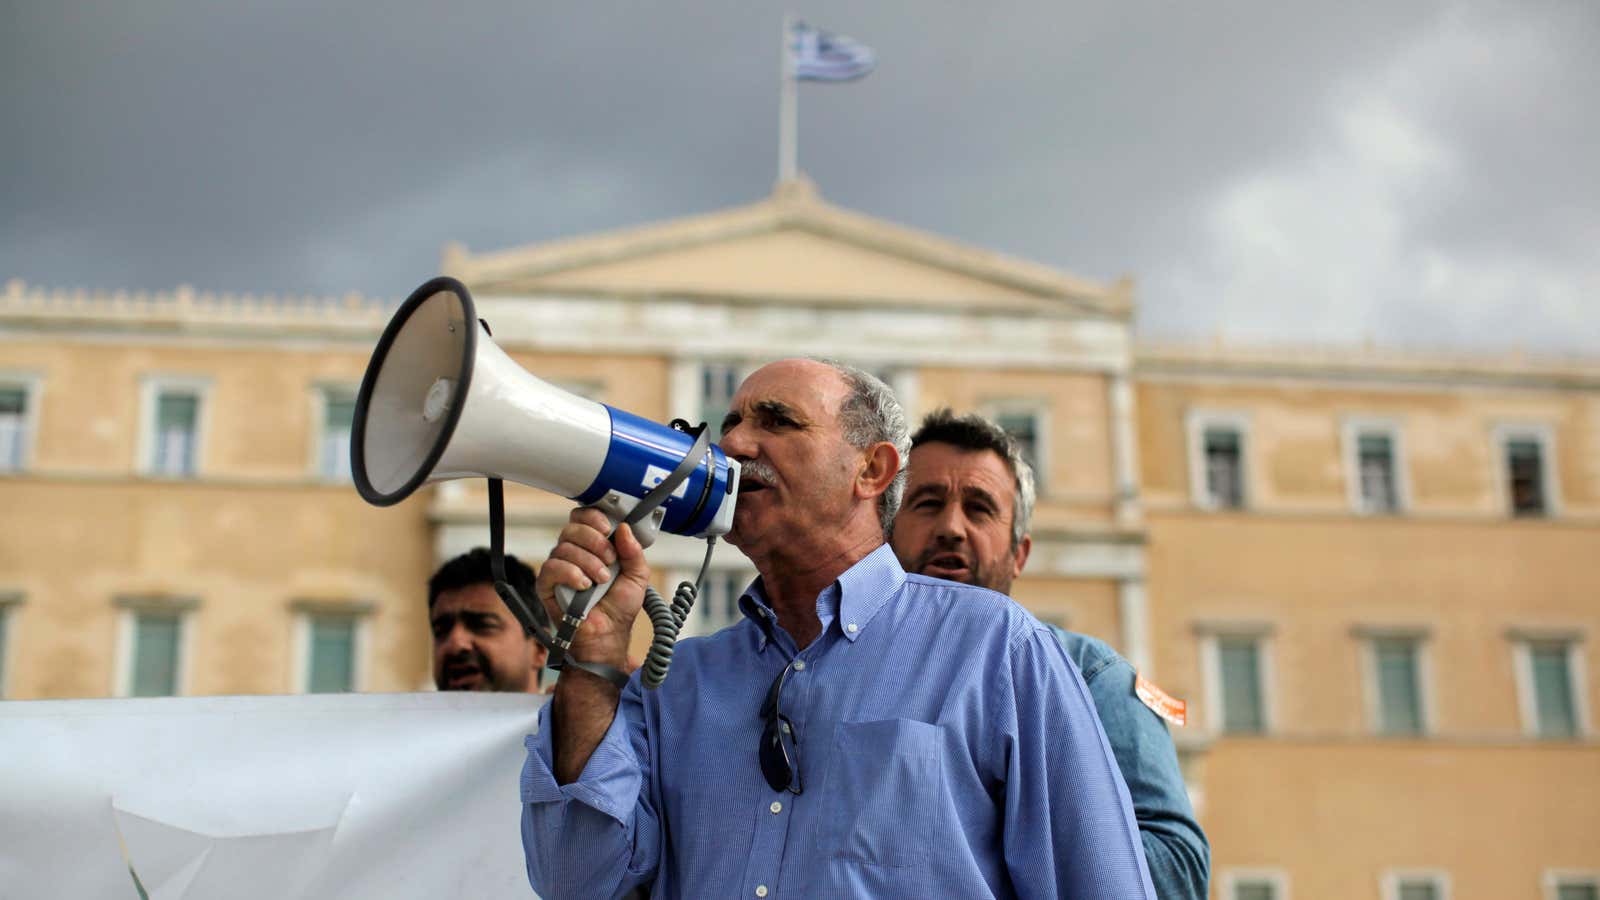 Protesting in front of the Greek Parliament